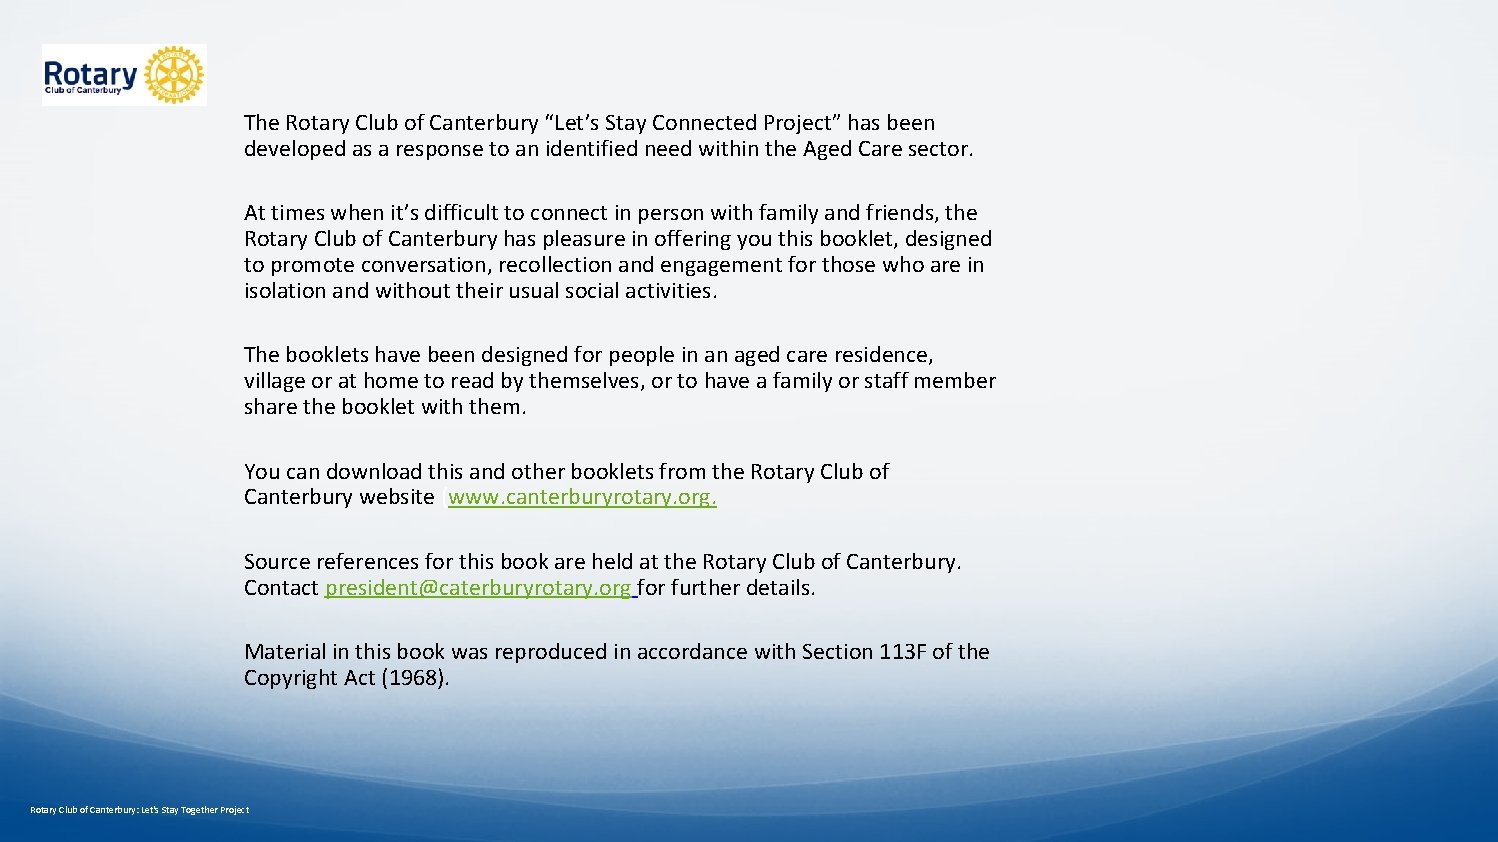 The Rotary Club of Canterbury “Let’s Stay Connected Project” has been developed as a